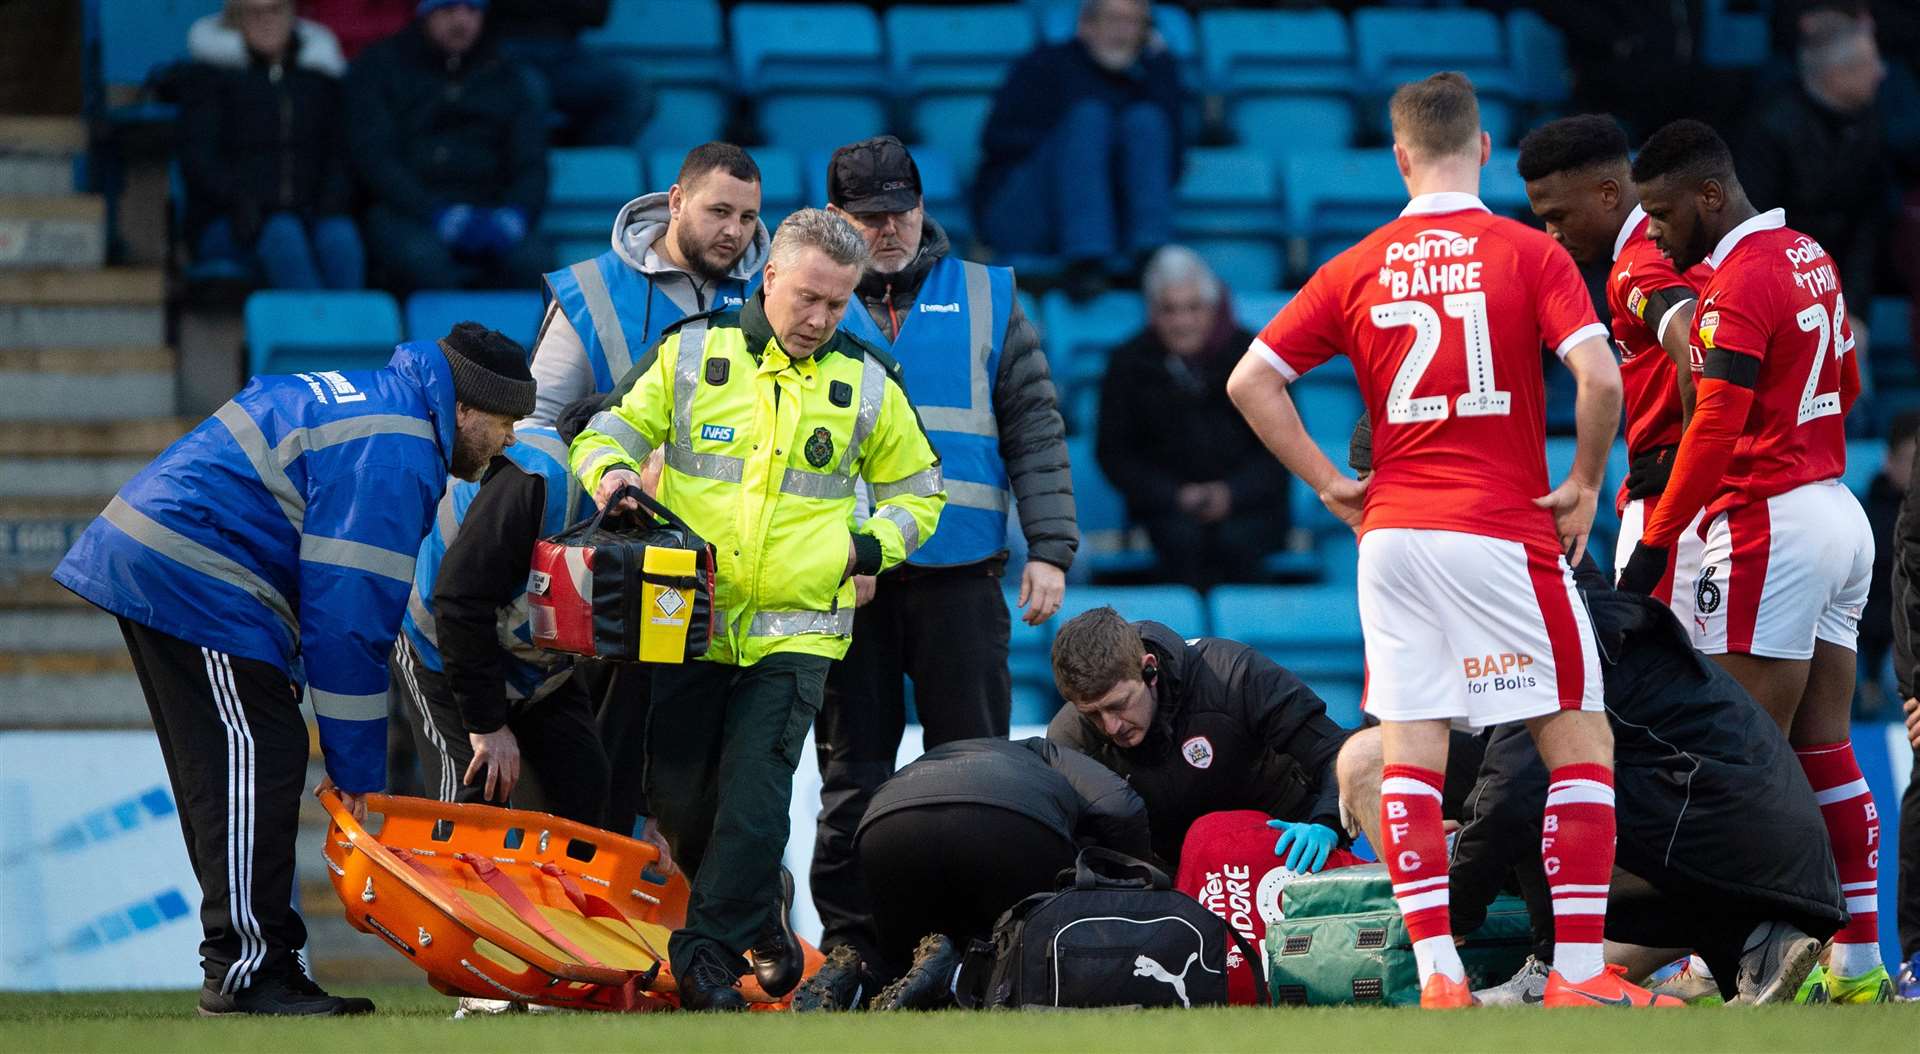 Concern for Tykes striker Kieffer Moore, who was taken to hospital after colliding with Gabriel Zakuani Picture: Ady Kerry